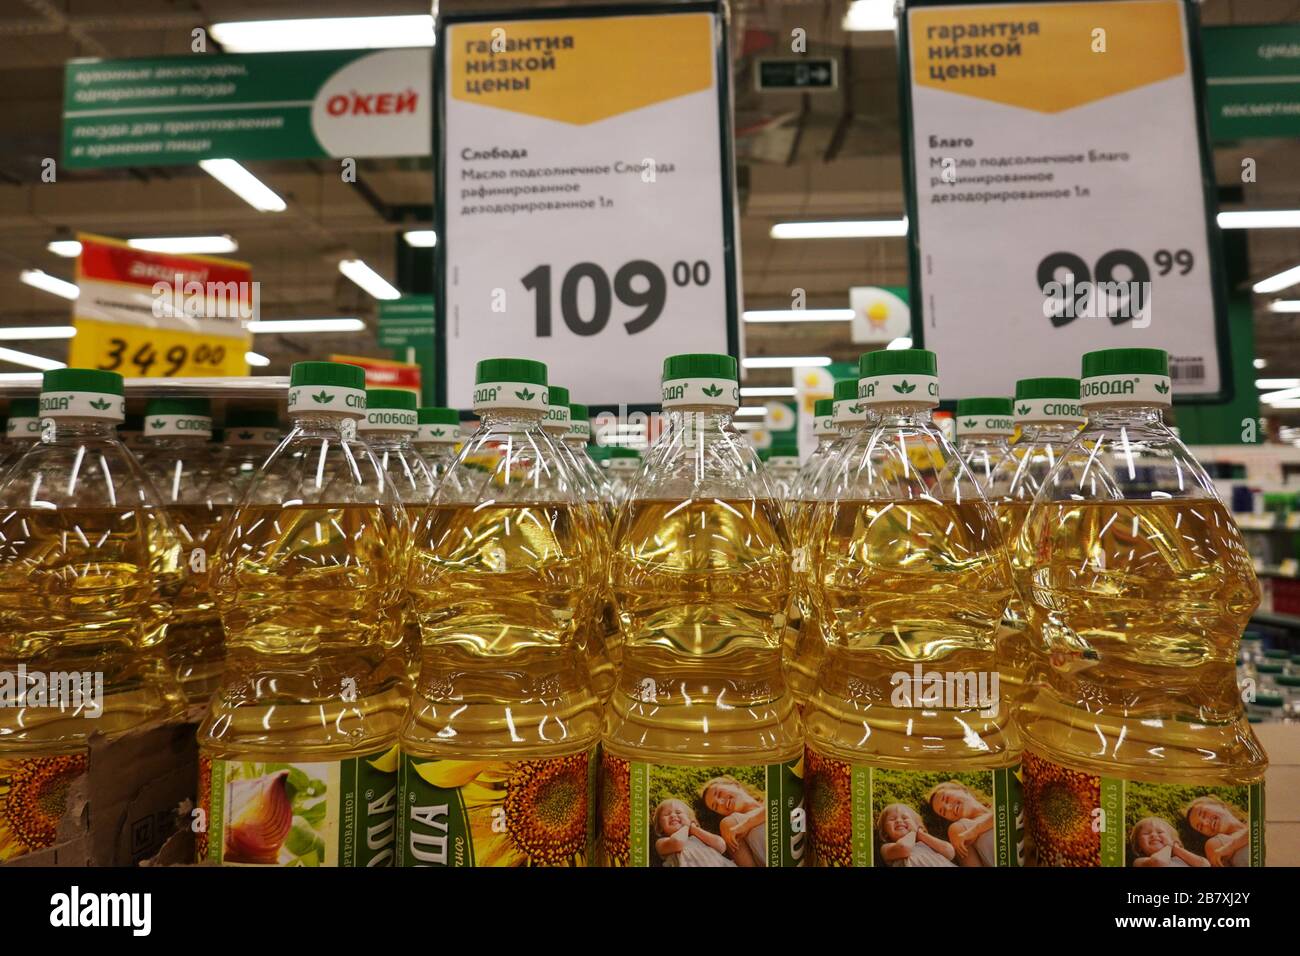 Sunflower seed oil in the supermarket during the COVID-19 pandemic in Russia, Astrakhan Stock Photo